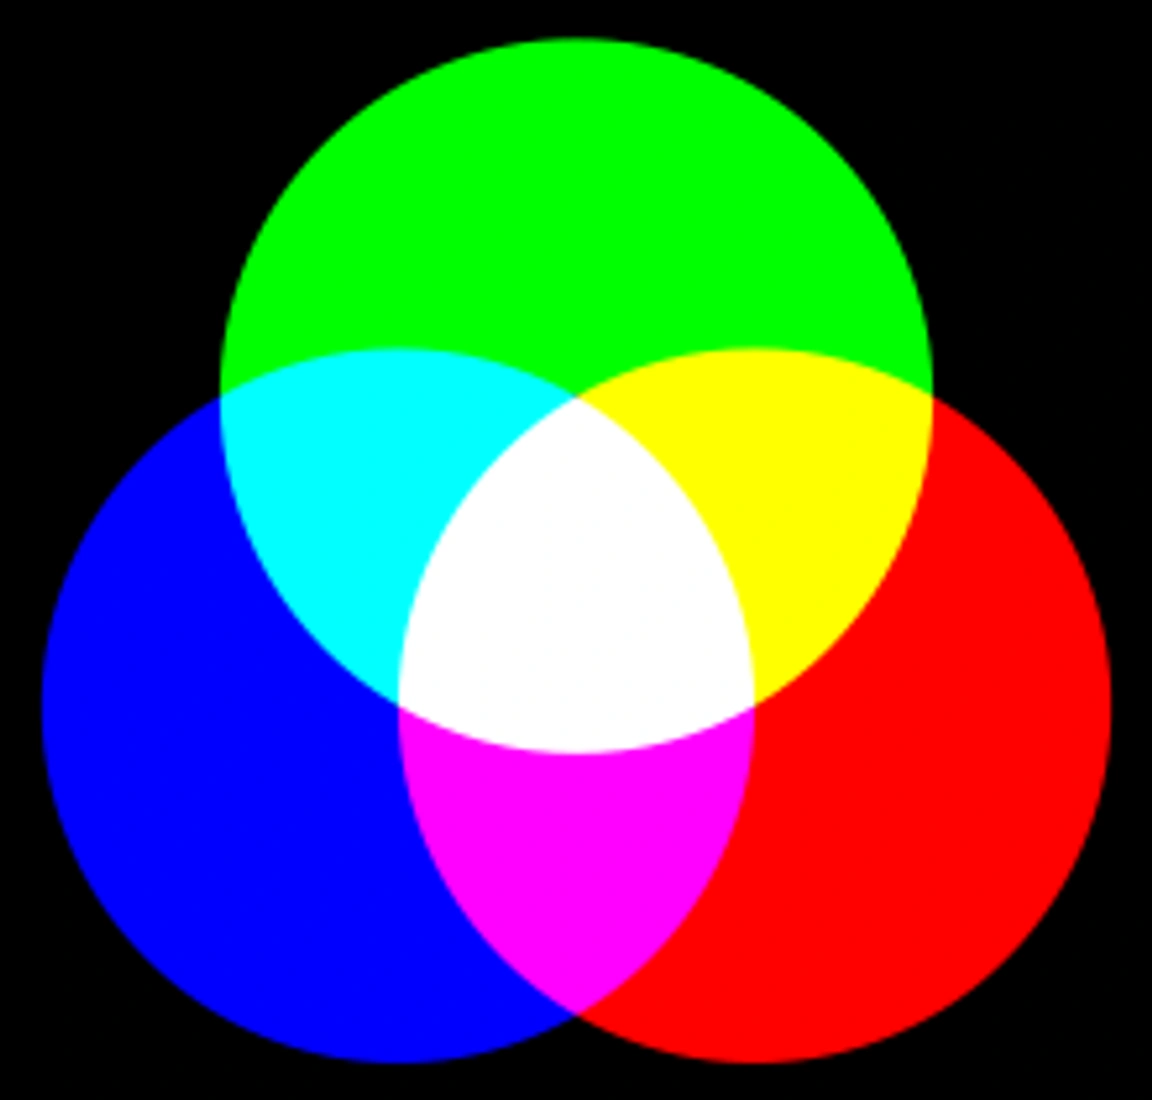 An illustration on color mixing.